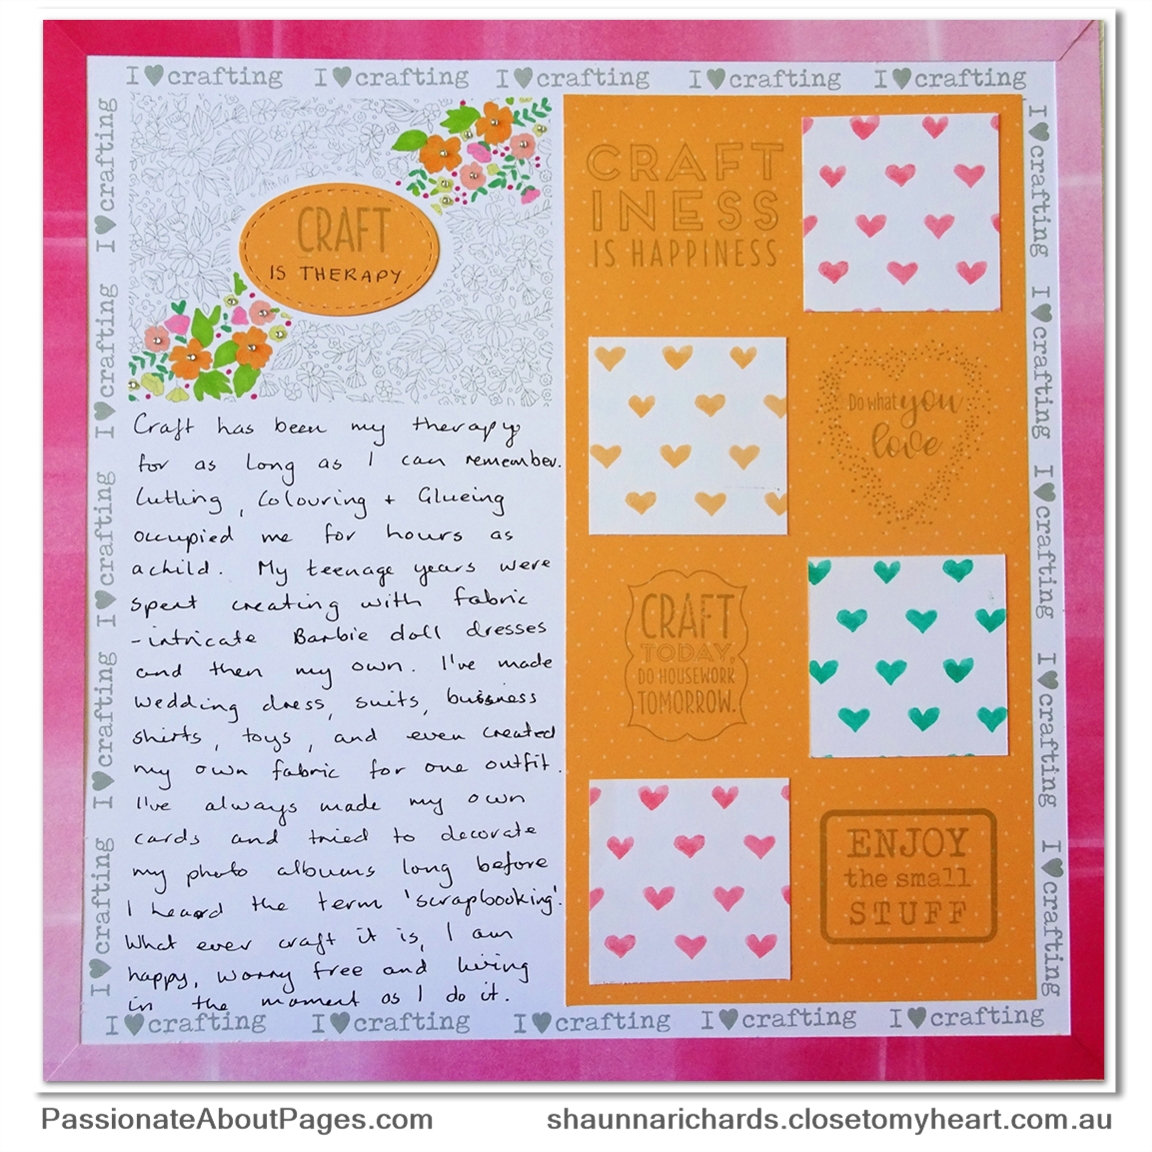 S1808 For the Love of Crafting stamp set is availalbe during August, 2018 only at www.shaunnarichards.closetomyheart.com.au. All crafters need this one in their stash.